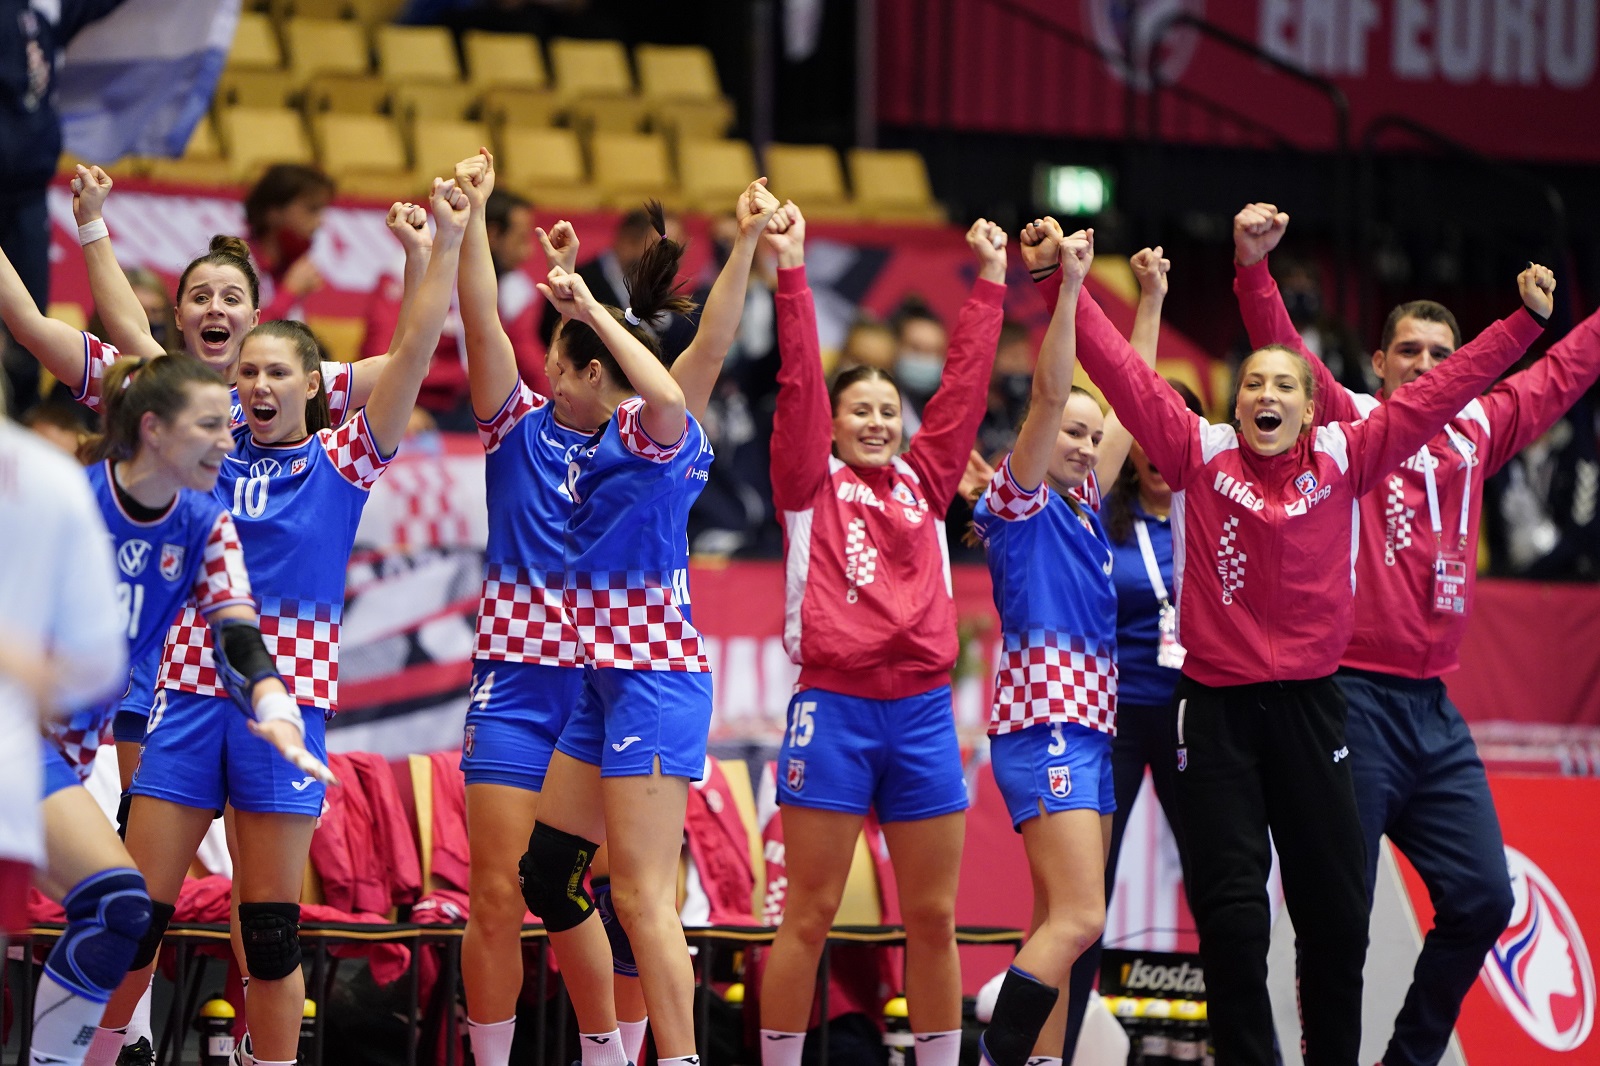 epa08896135 Croatia players celebrate during the bronze medal match between Croatia and Denmark at the EHF Euro 2020 women's European Championships in Herning, Denmark, 20 December 2020.  EPA/HENNING BAGGER  DENMARK OUT